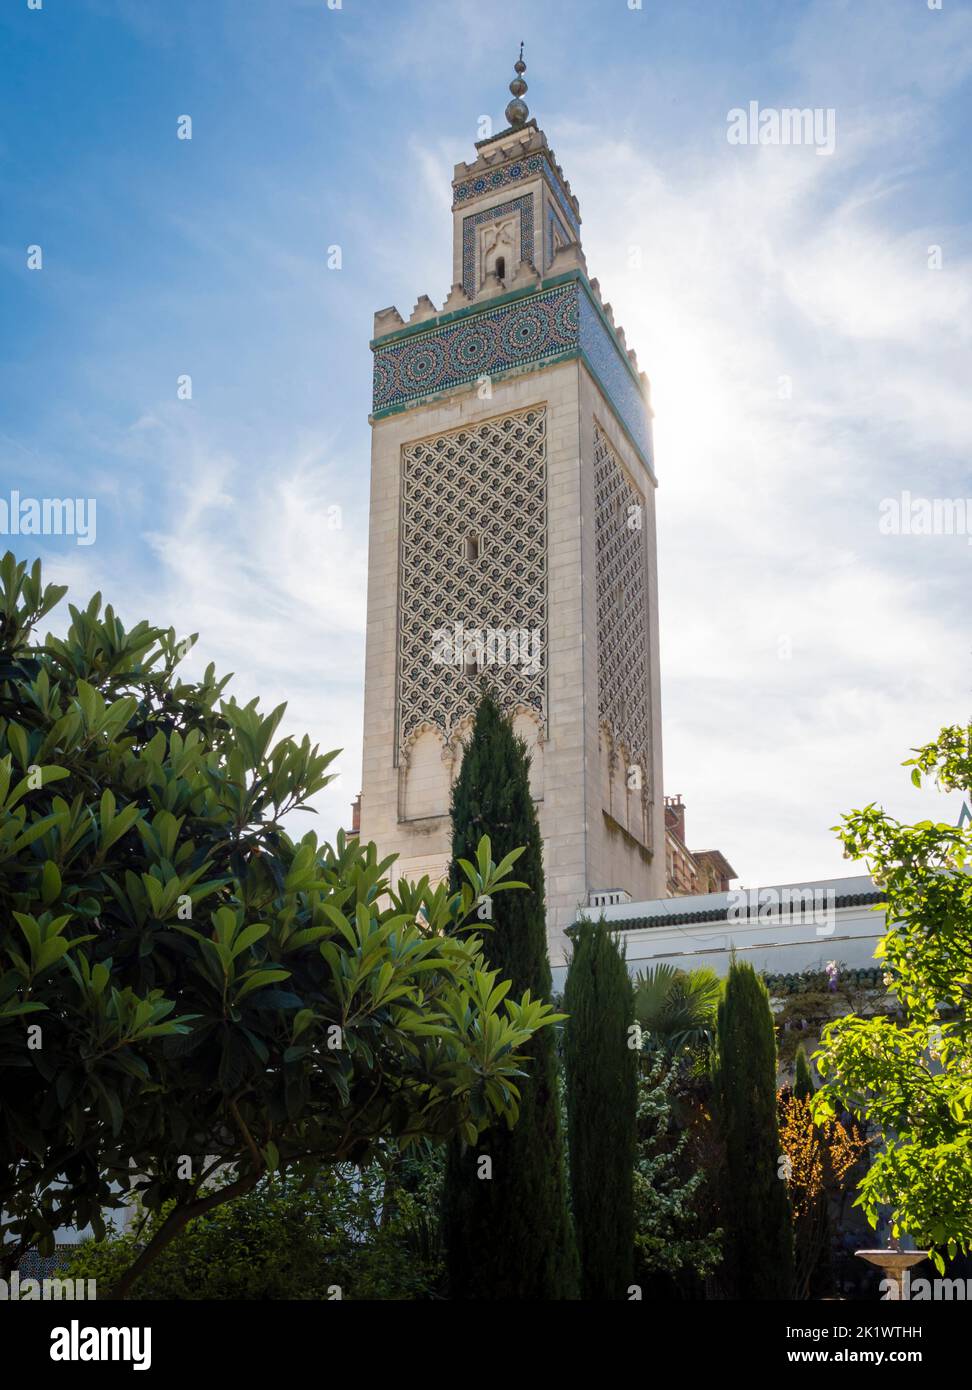 Courtyard of the Grand Mosque of Paris, one of the largest mosques in France Stock Photo